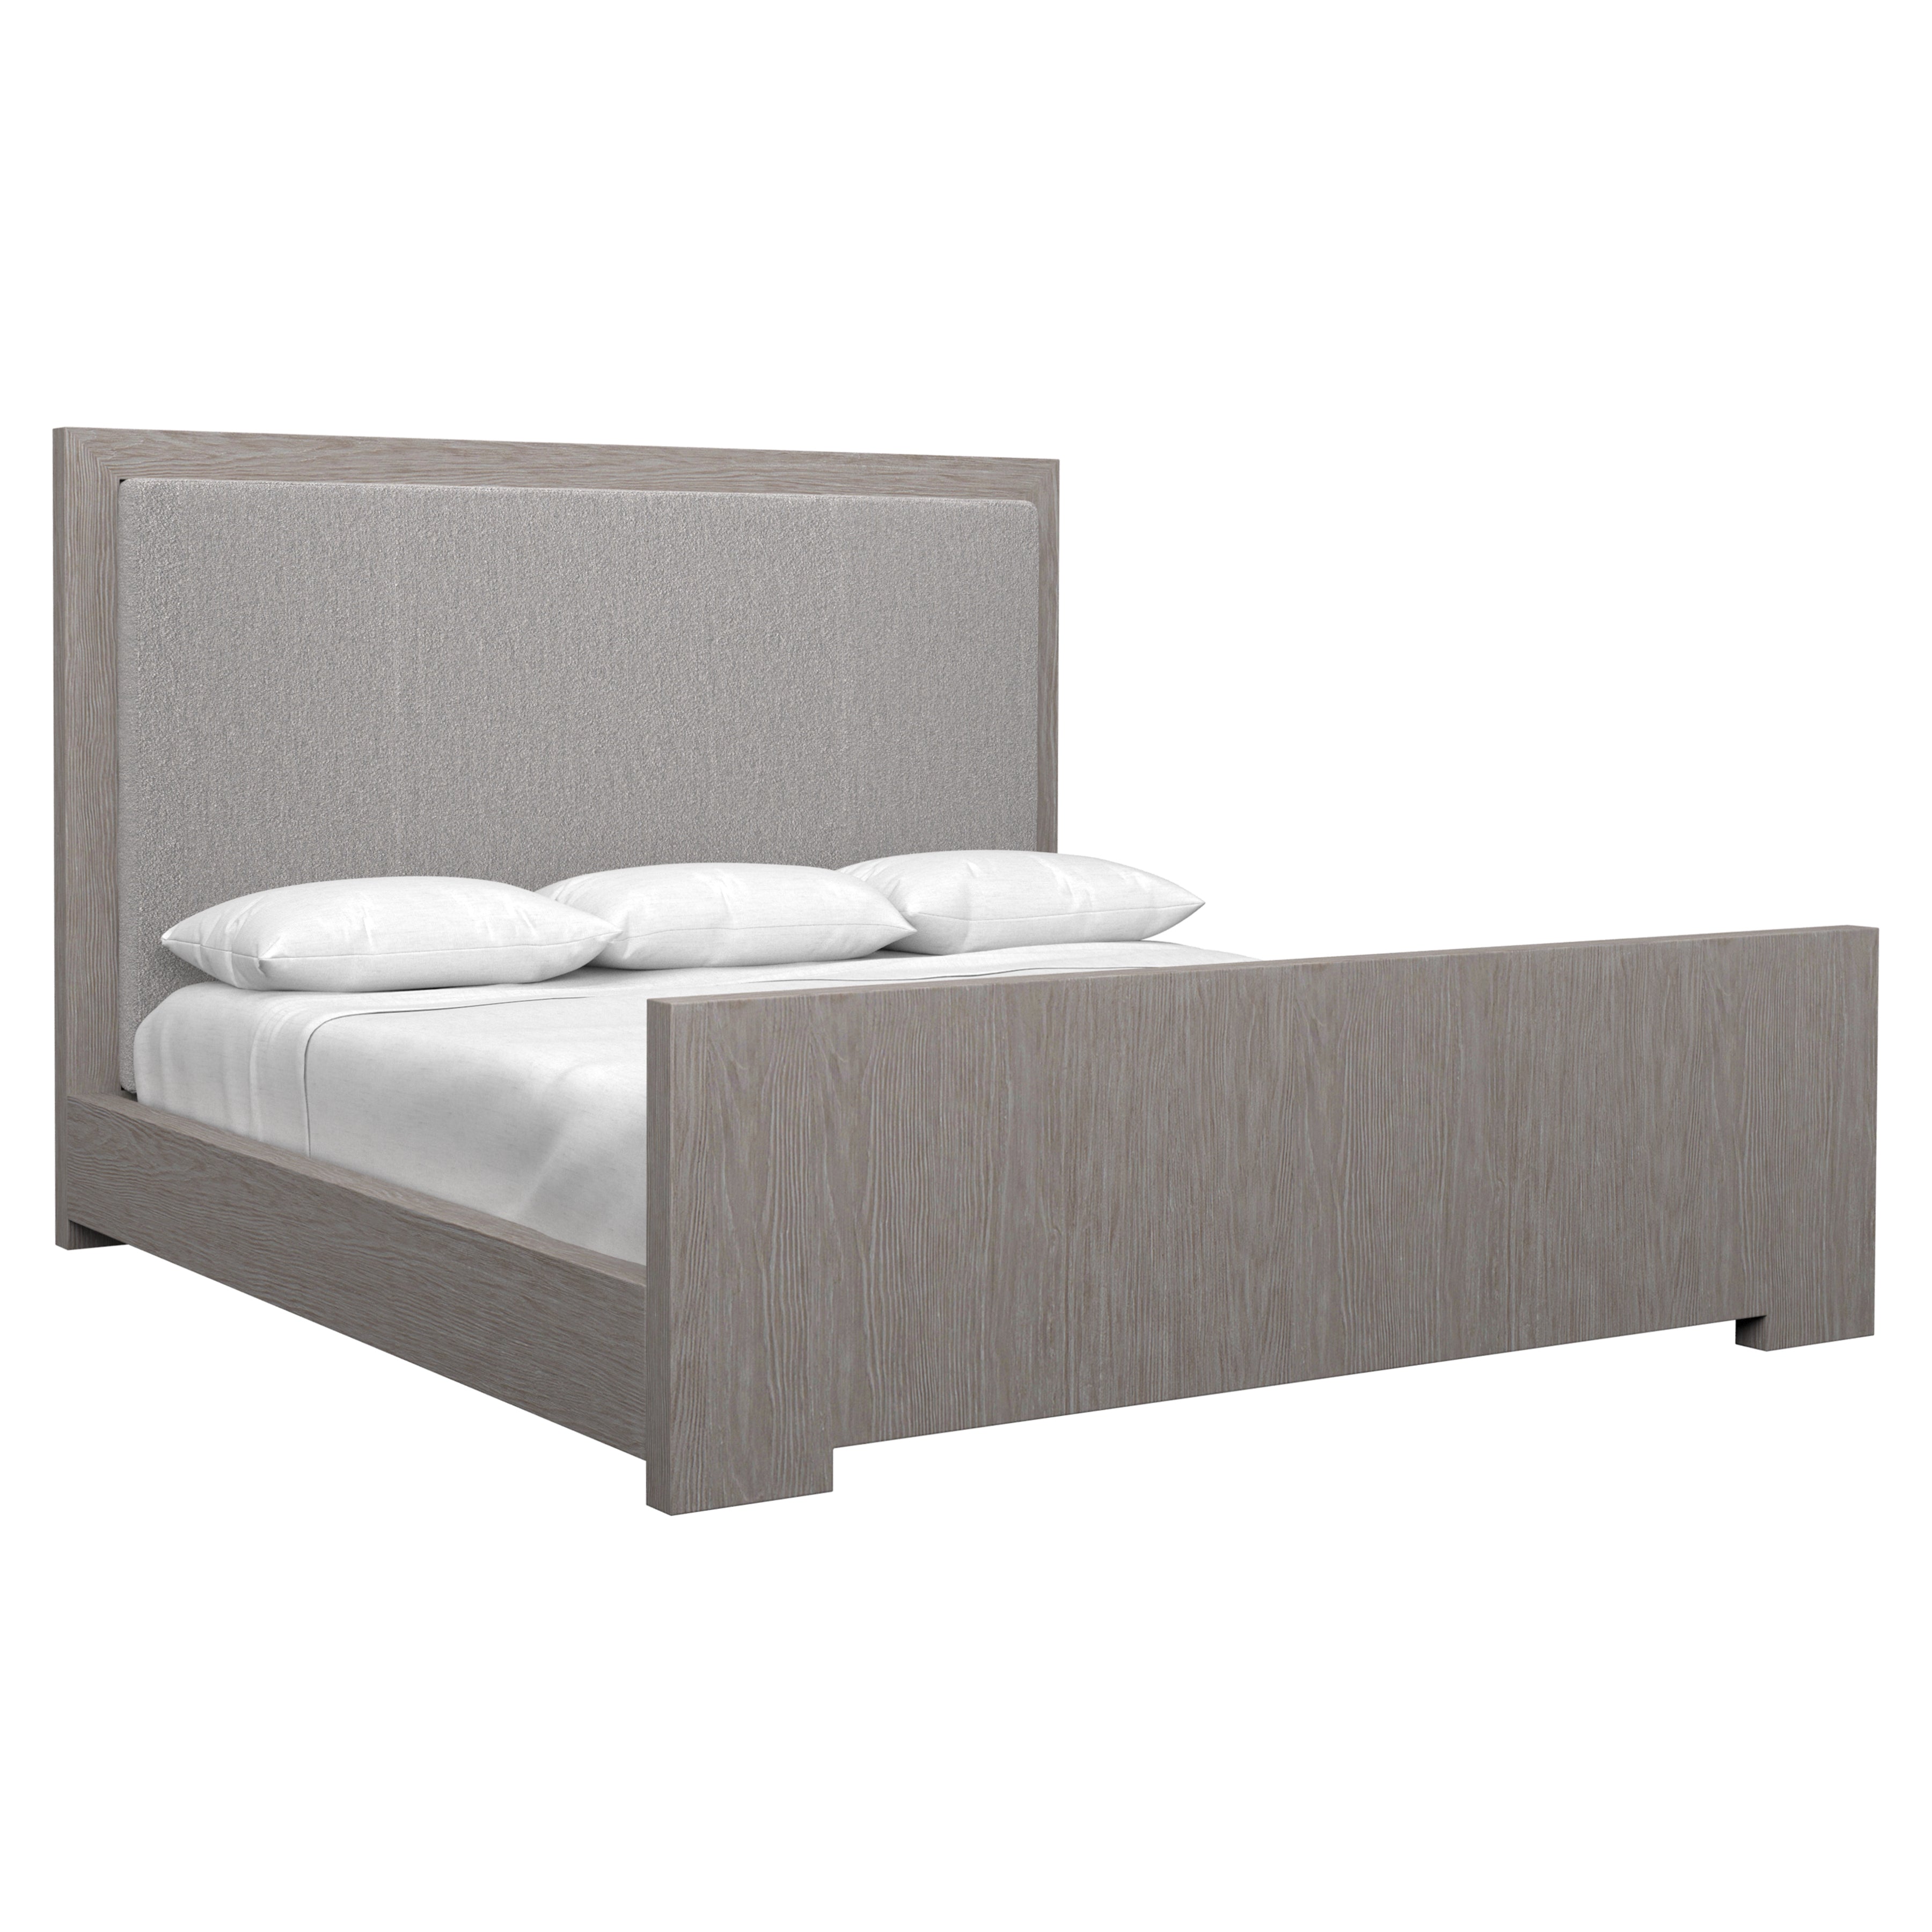 Trianon King Panel Bed in Gris Wood Finish